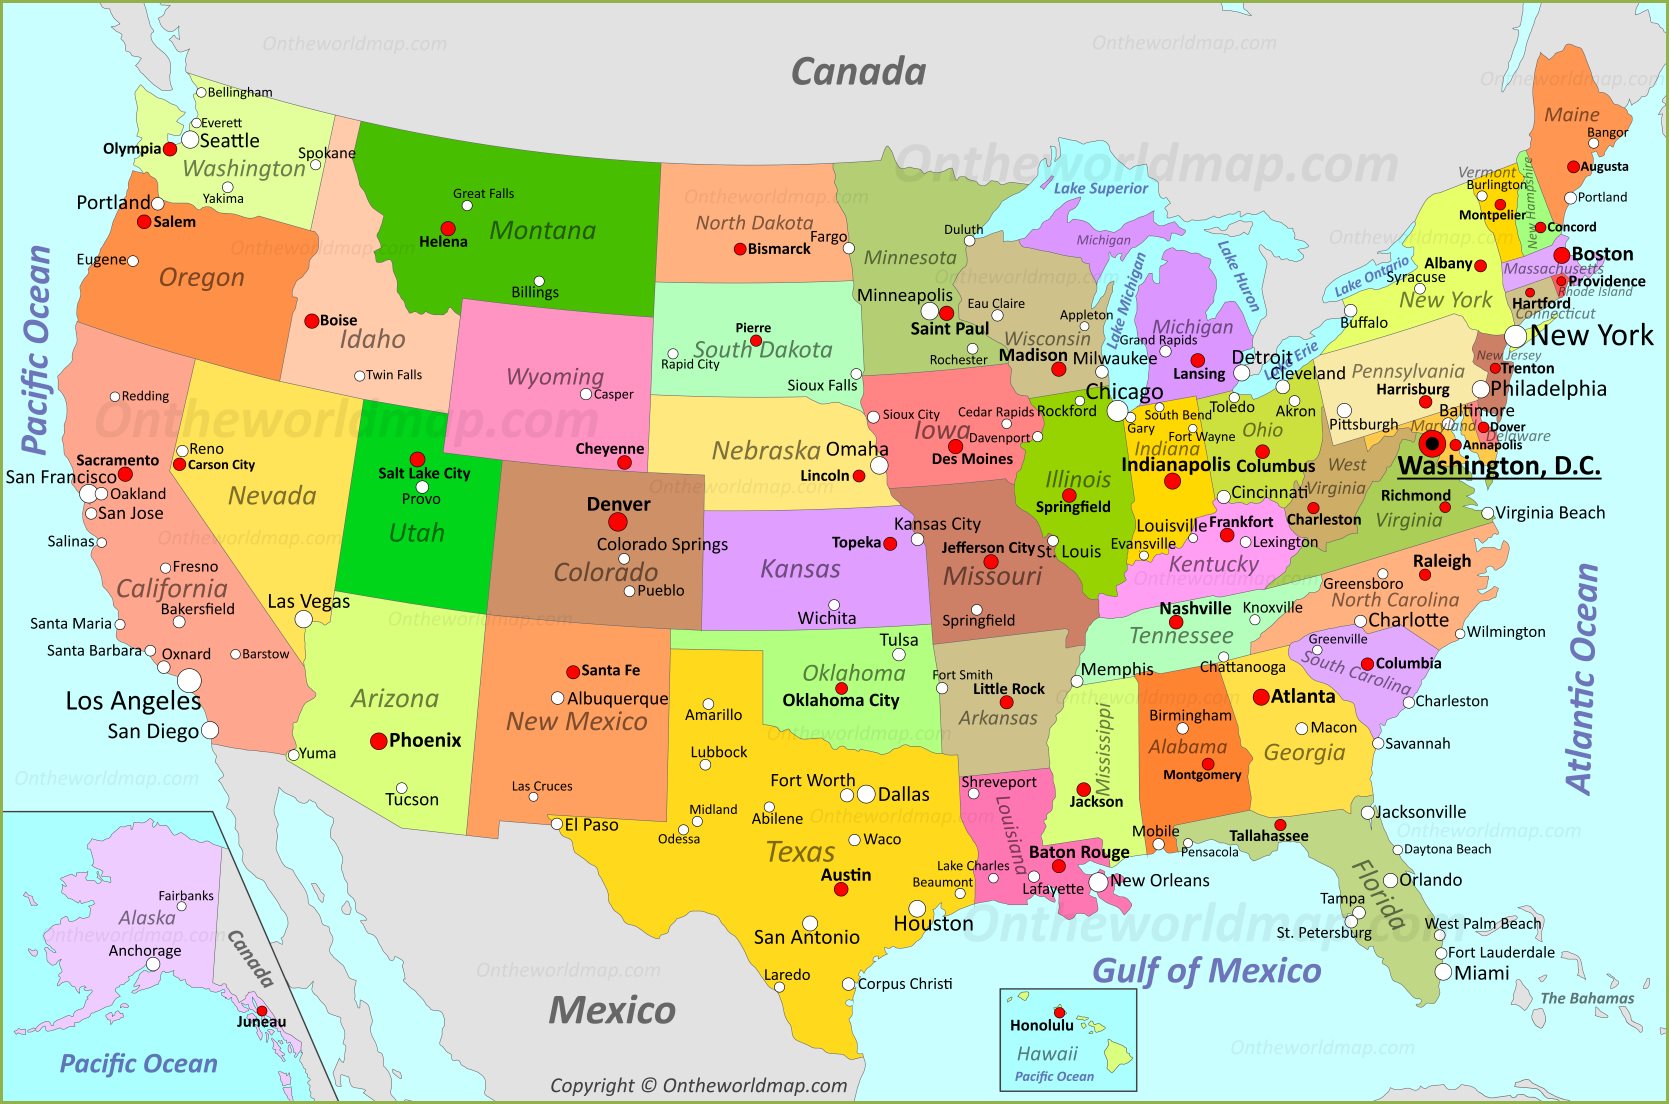 map-of-usa-showing-states-and-cities-topographic-map-of-usa-with-states